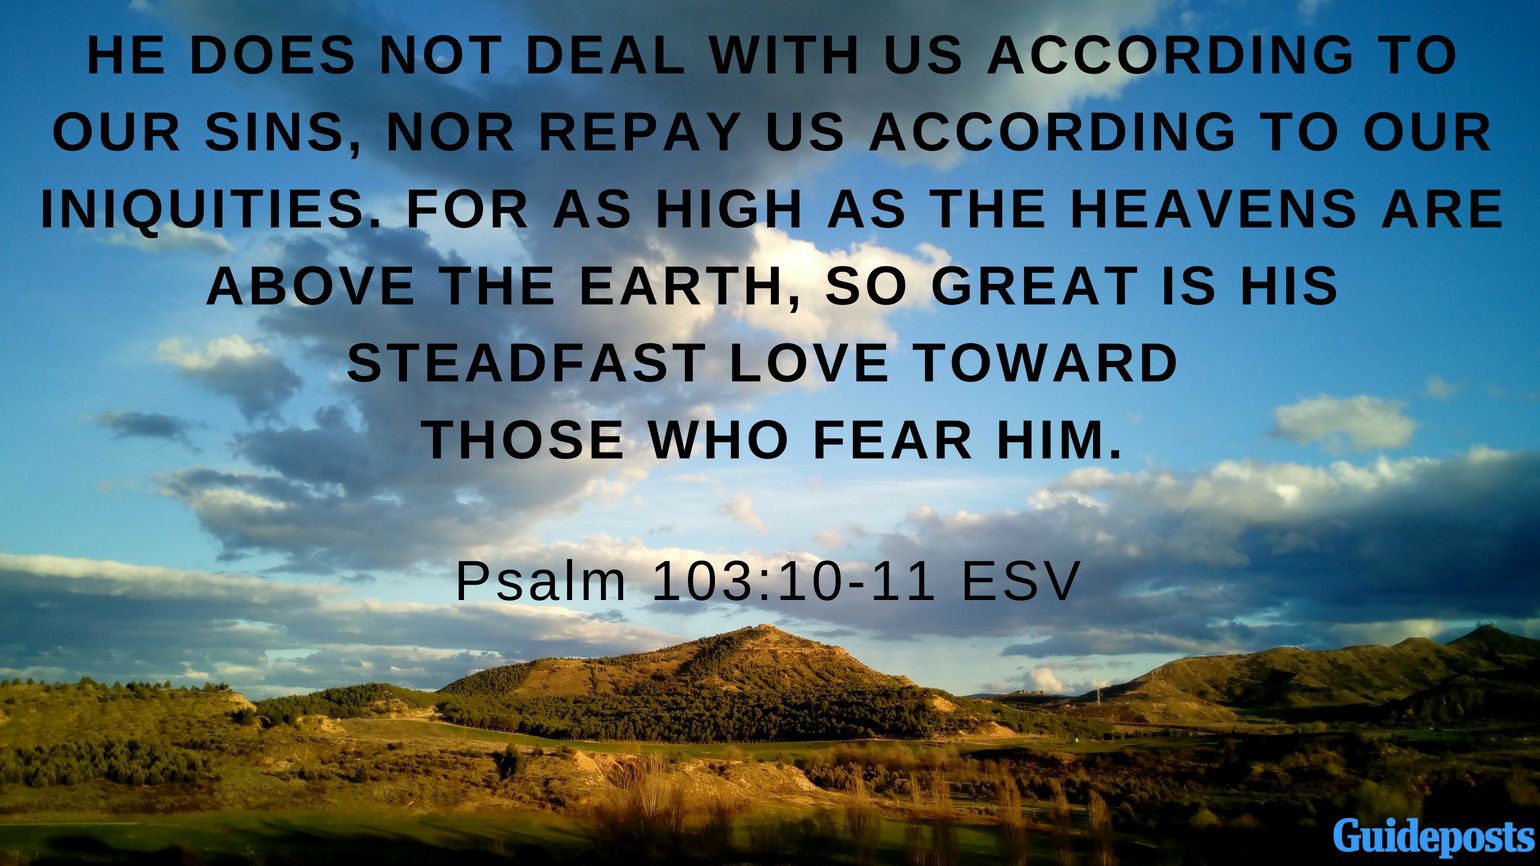 Bible Verses to Help You Forgive Yourself: He does not deal with us according to our sins, nor repay us according to our iniquities. For as high as the heavens are above the earth, so great is his steadfast love toward those who fear him. Psalm 103:10-11 ESV better living life advice